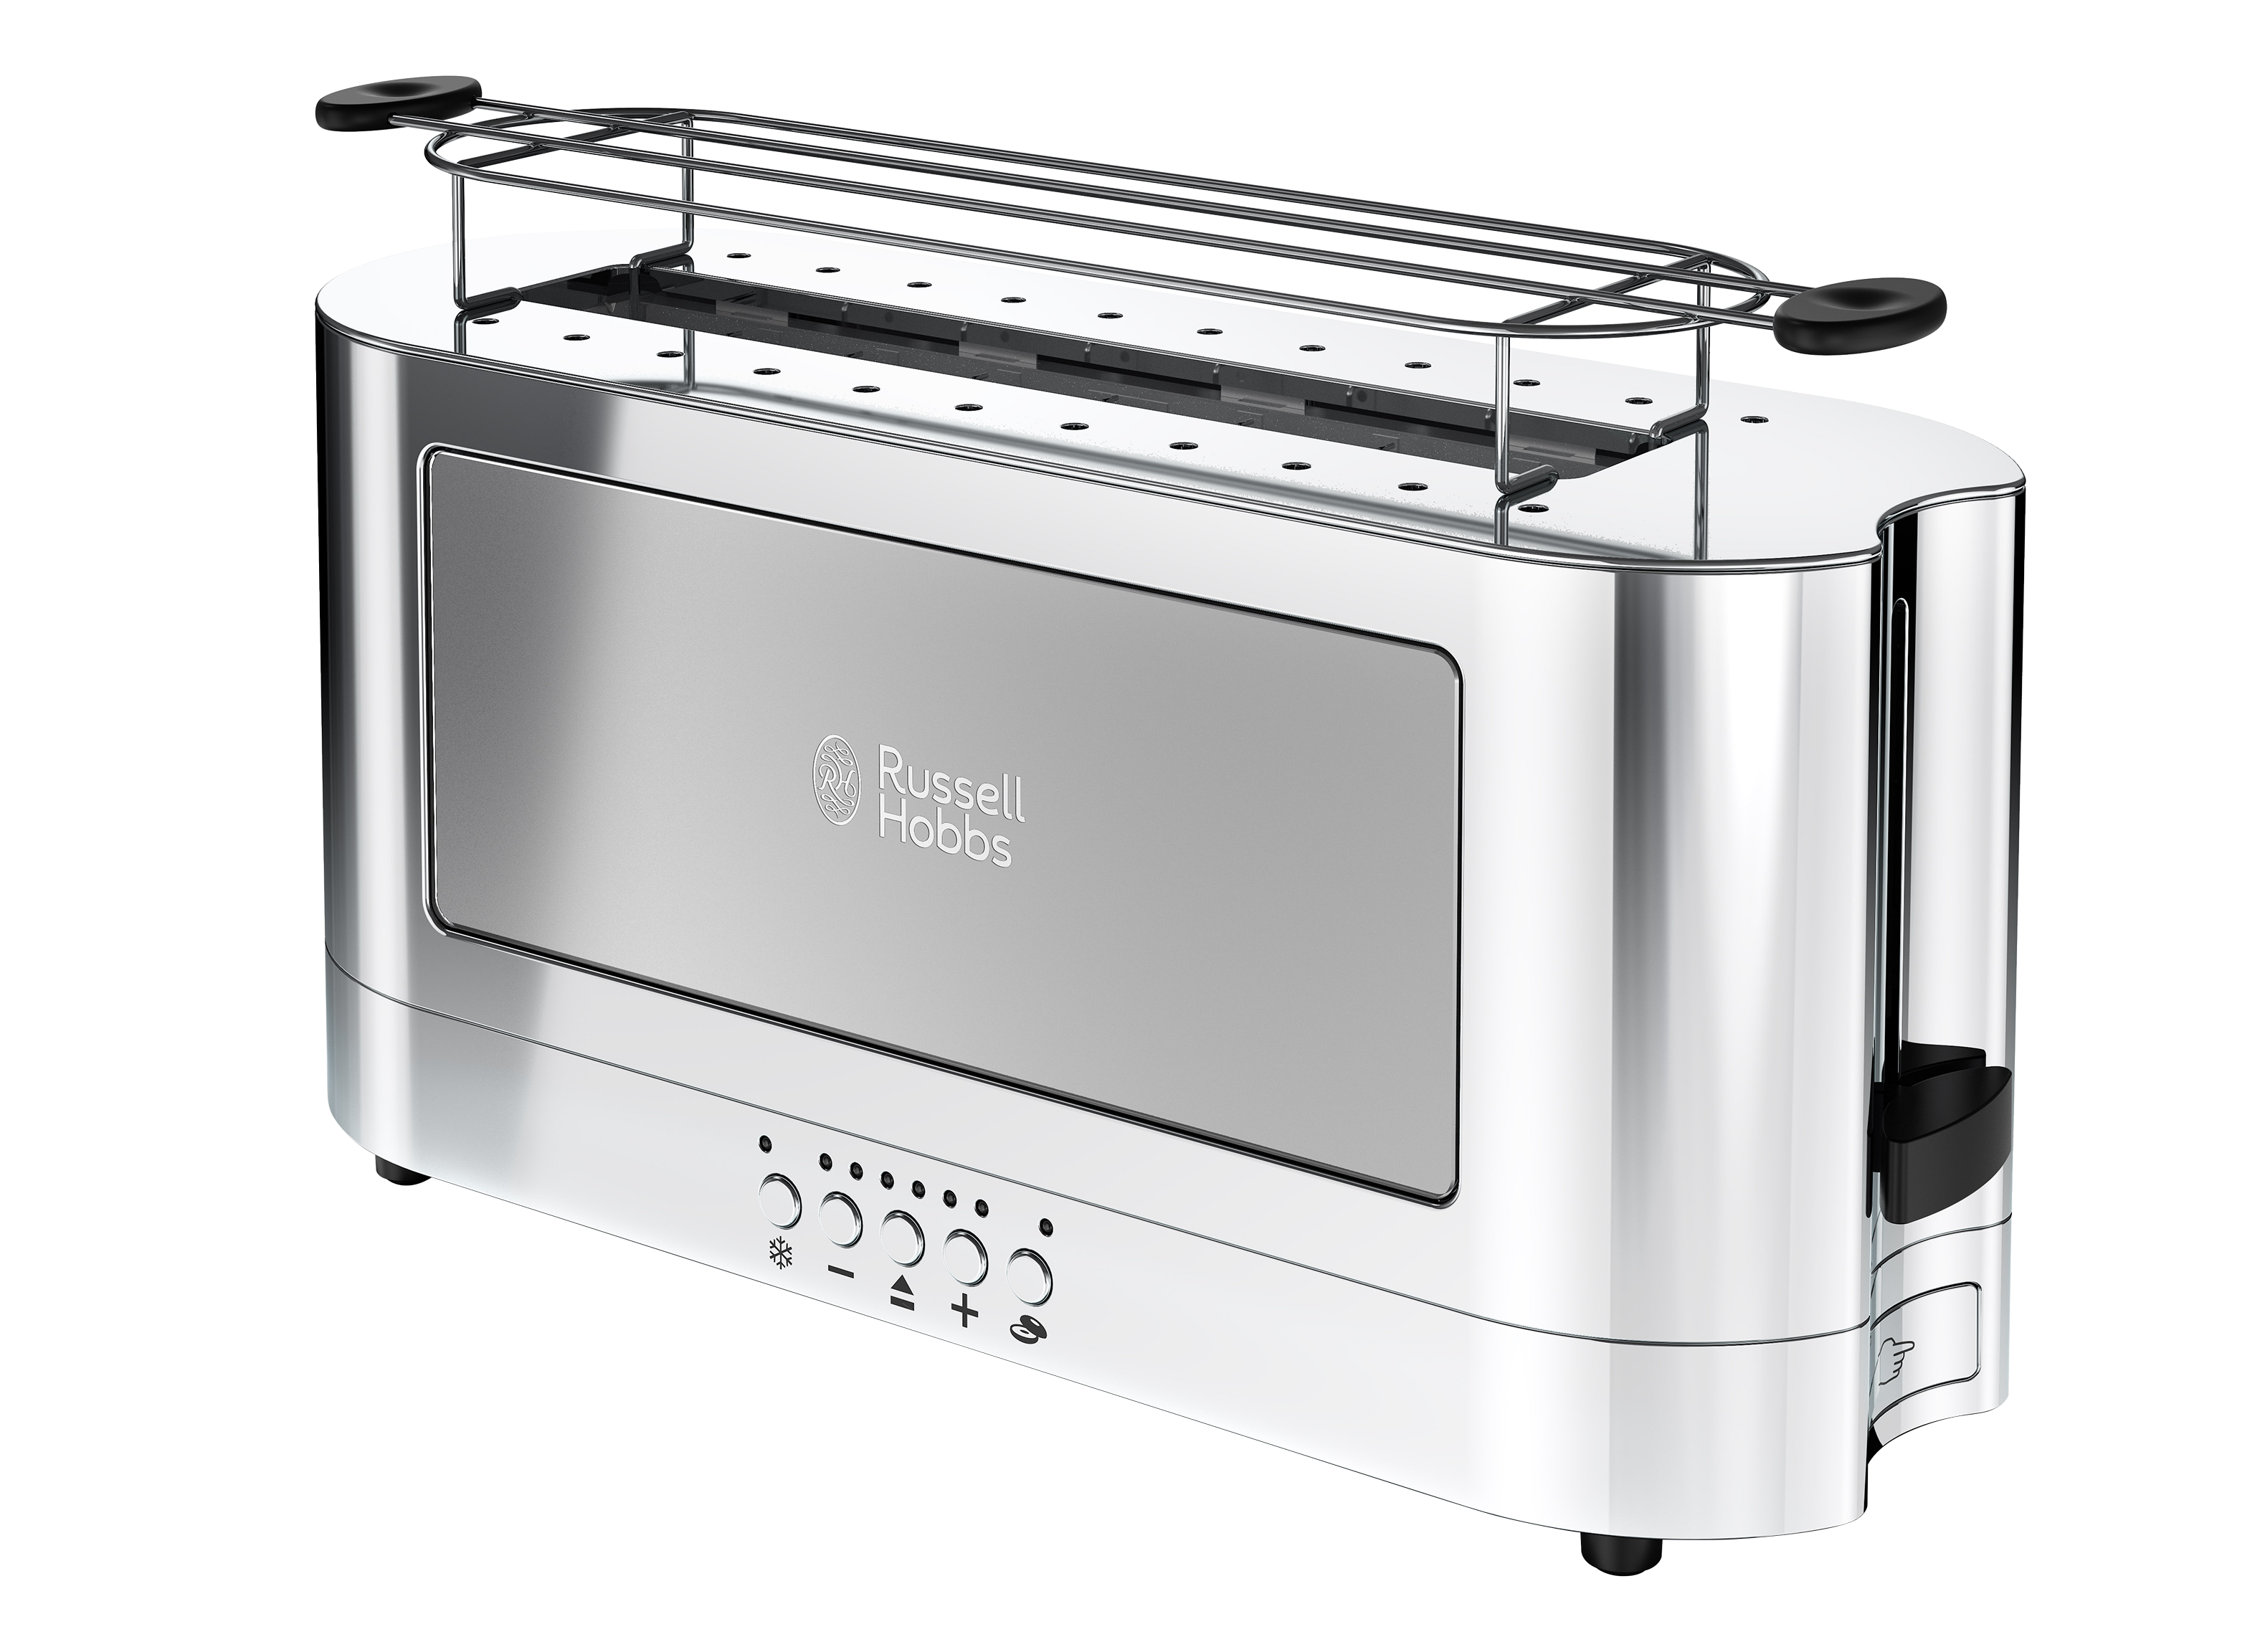 https://crdms.images.consumerreports.org/prod/products/cr/models/398519-toasters-russell-hobbs-2-slice-glass-accent-trl9300gyr-10005051.png